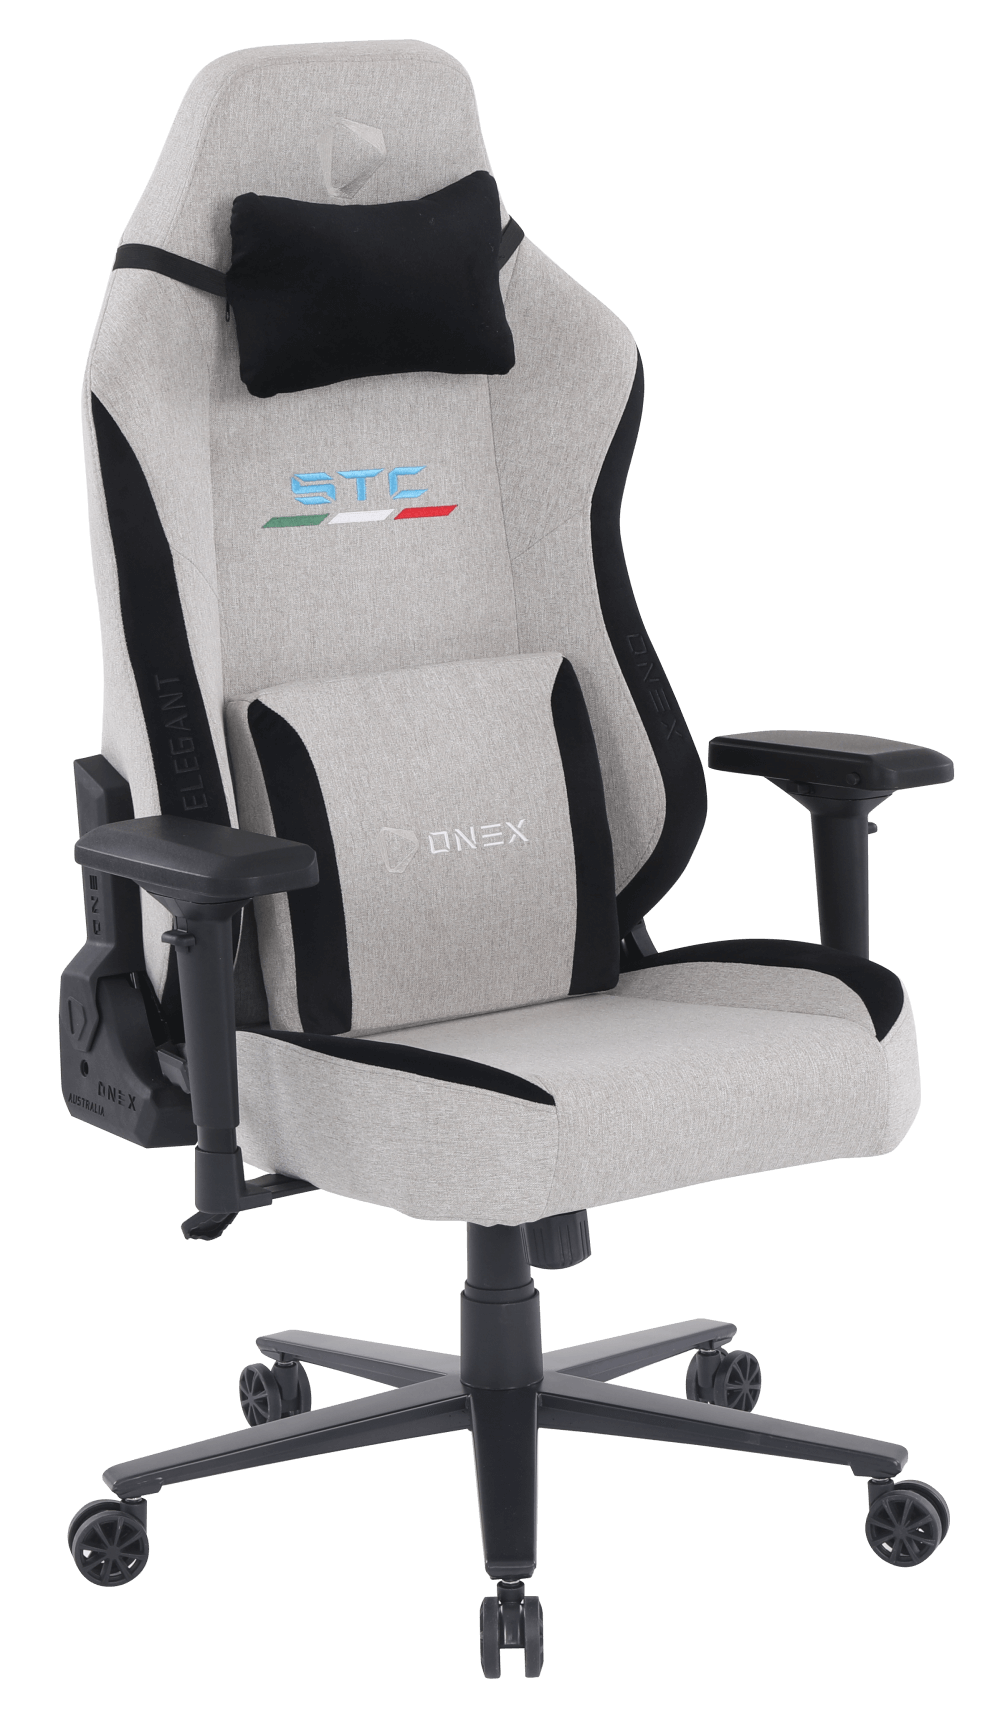  ONEX-STC ELEGANT Gaming /Office Chair - Ivory<BR><fONT COLOR='RED'>In-Store Pickup Not Available - Delivery Only (Freight Charges Apply)  